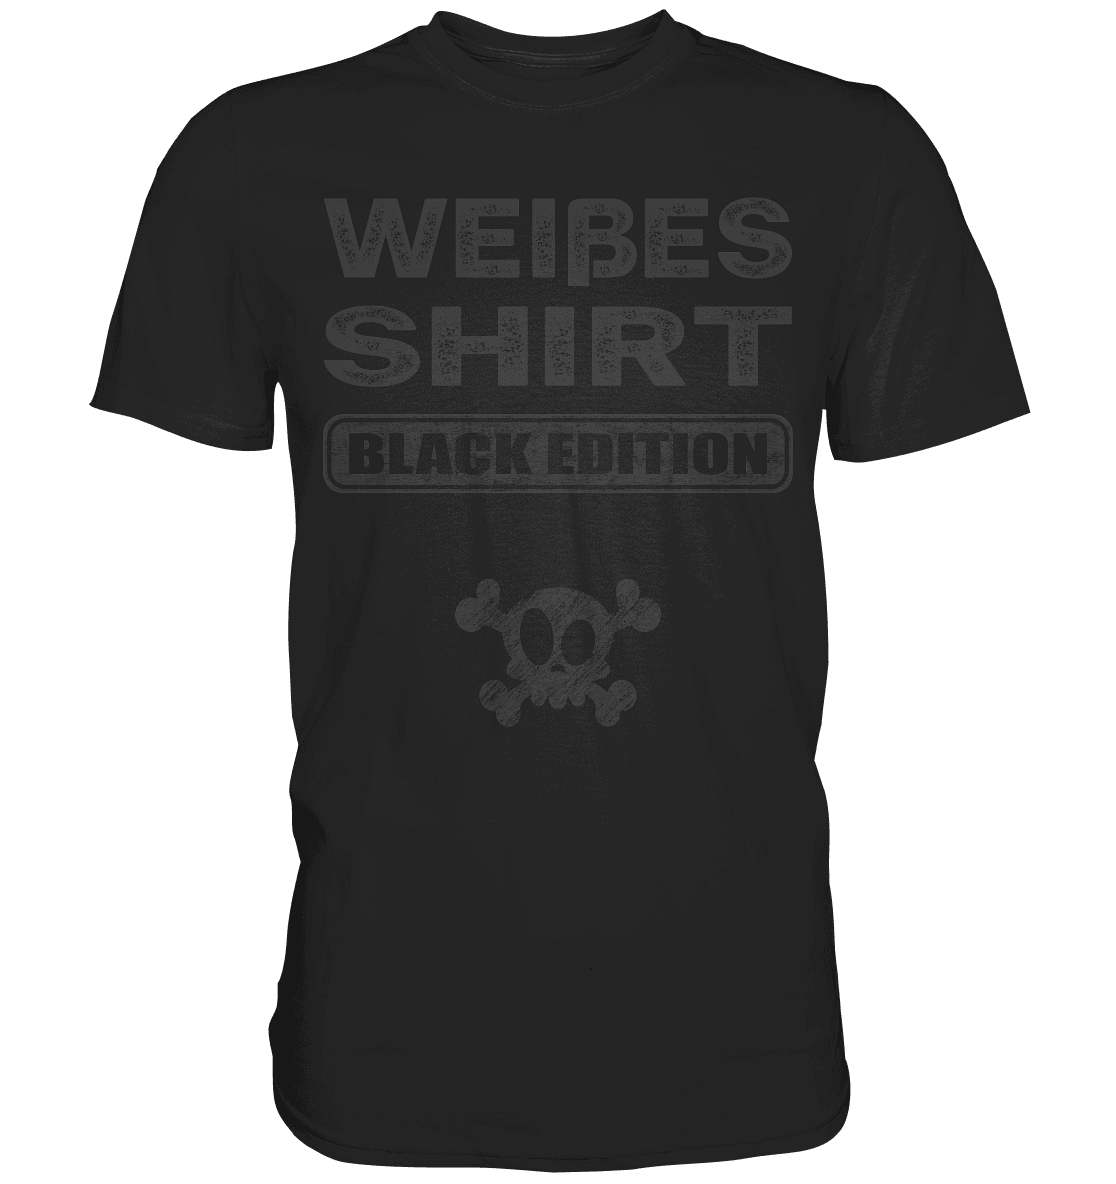 Weißes Shirt II - Black Edition - Totally Wasted